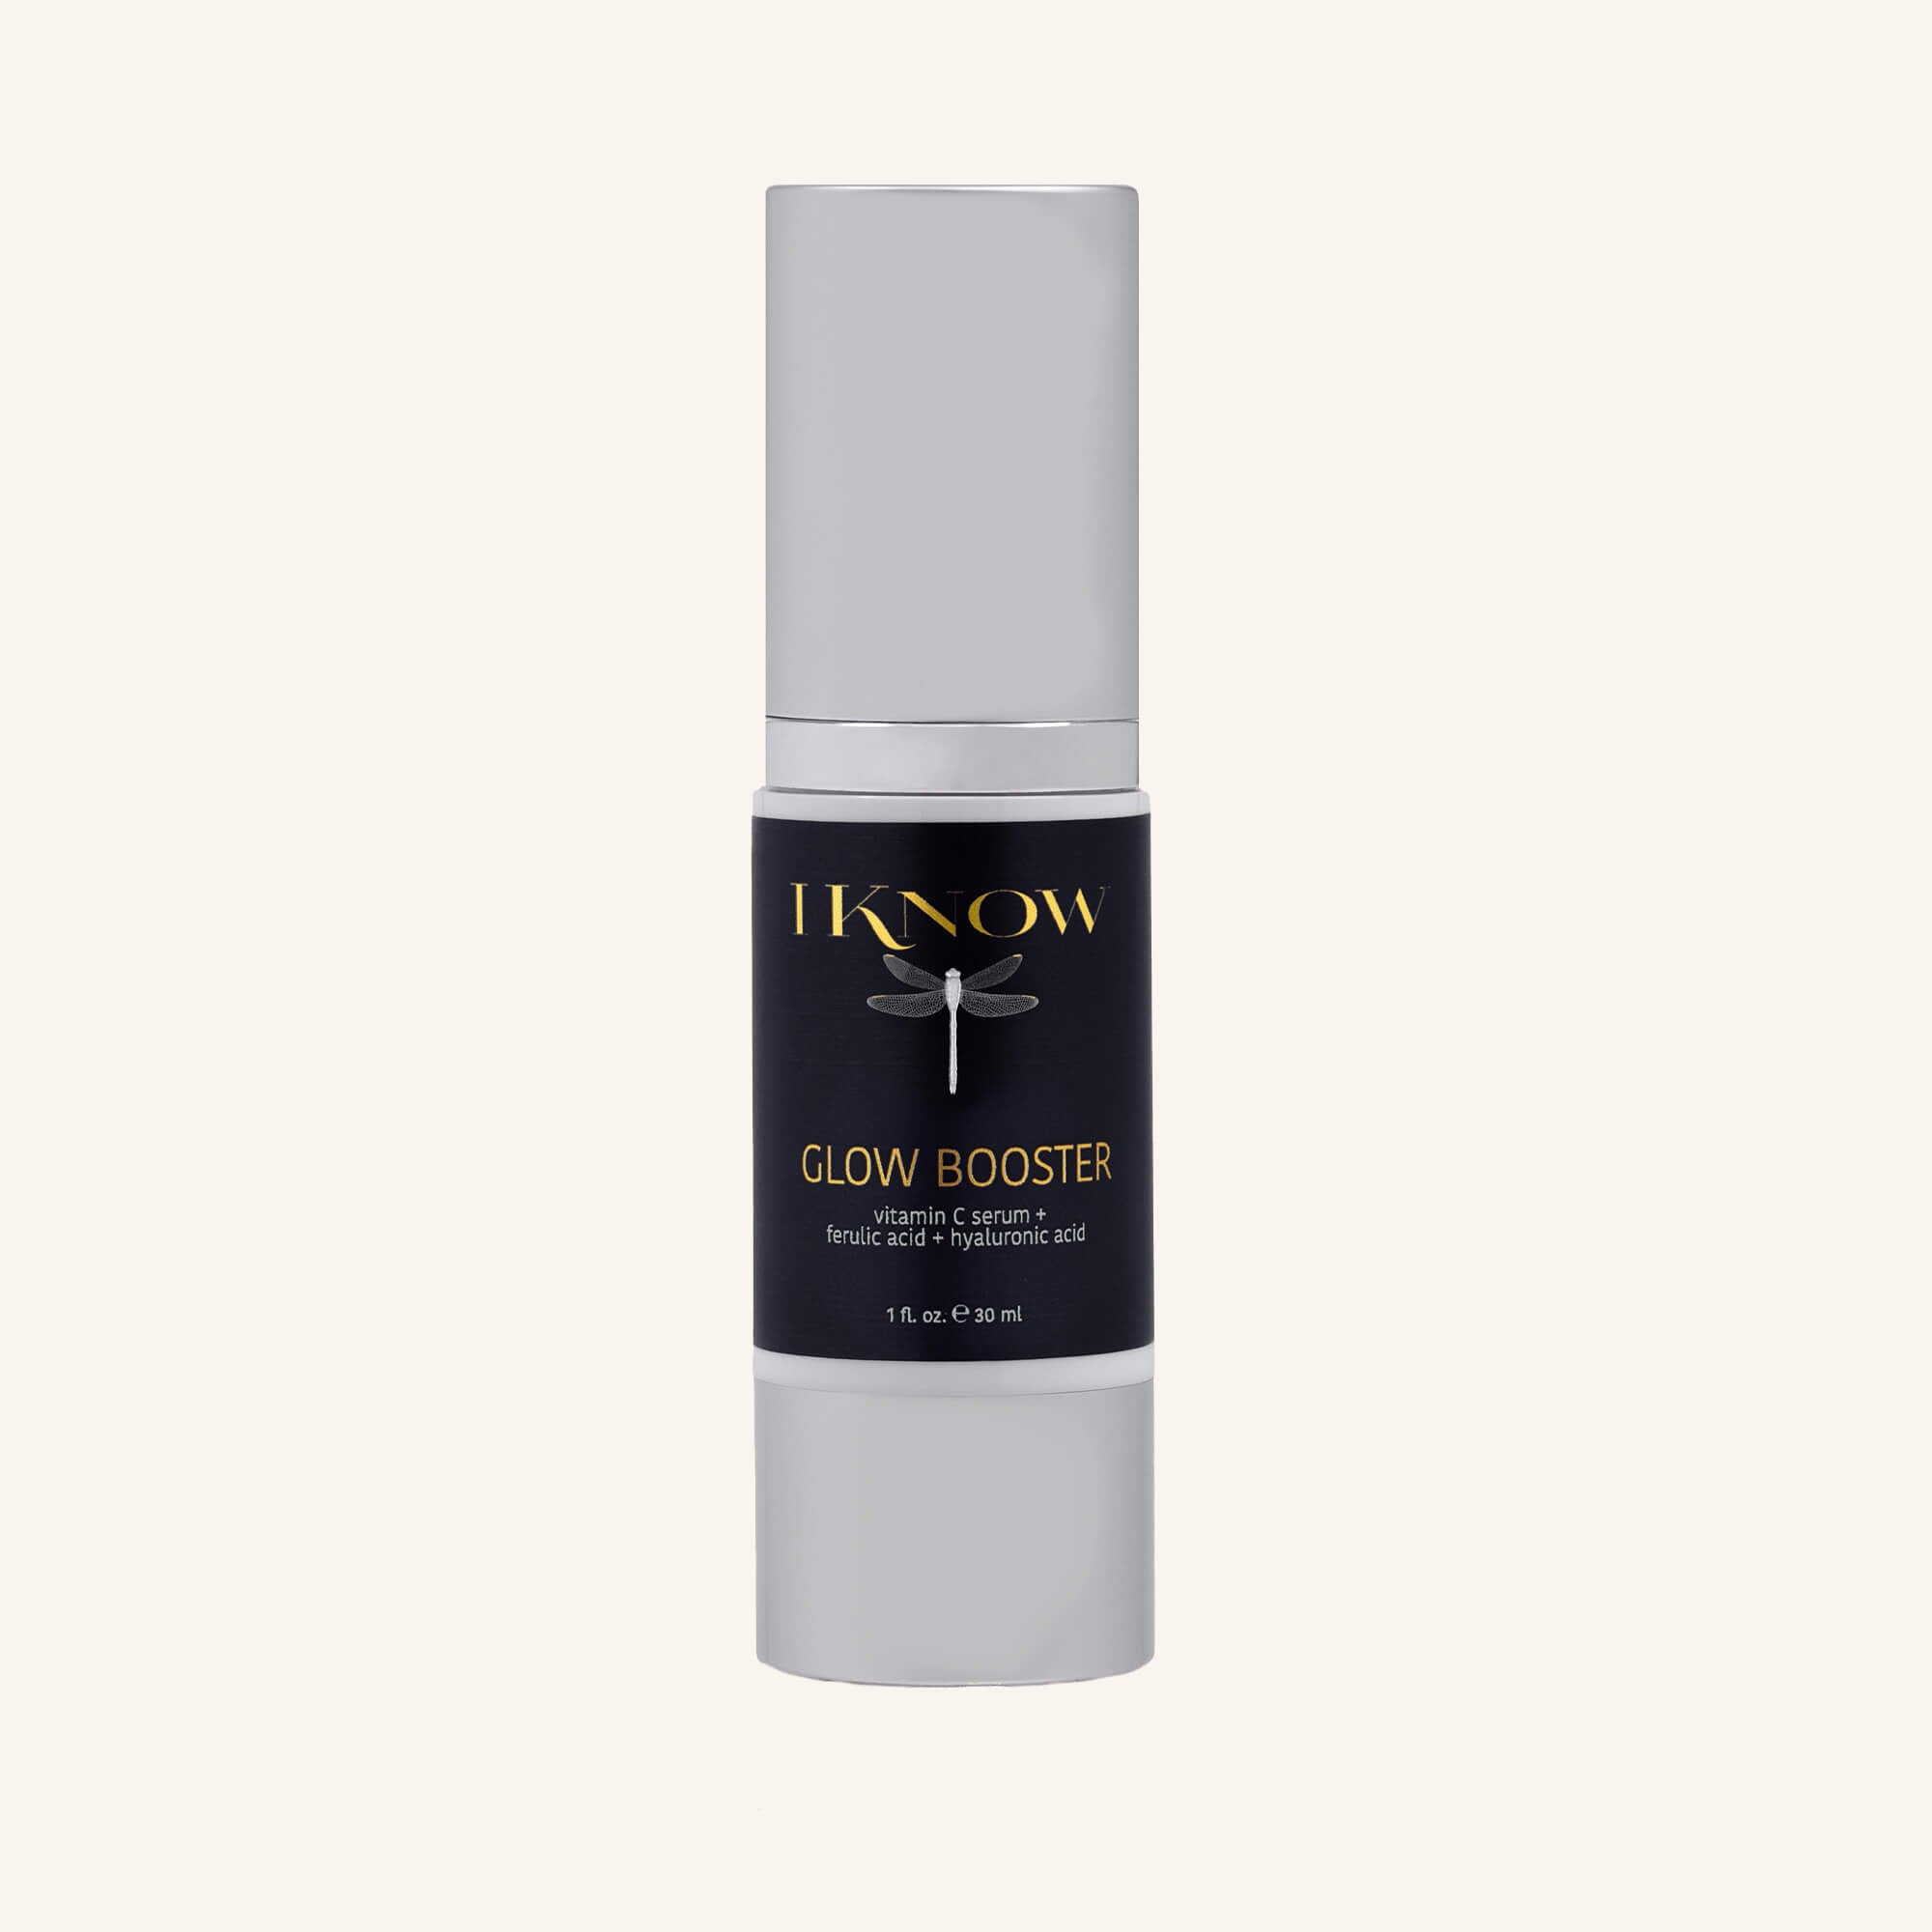 IKNOW Glow Booster Serum with Vitamin C, Ferulic Acid and Hyaluronic Acid for Hyperpigmentation and Dull Skin